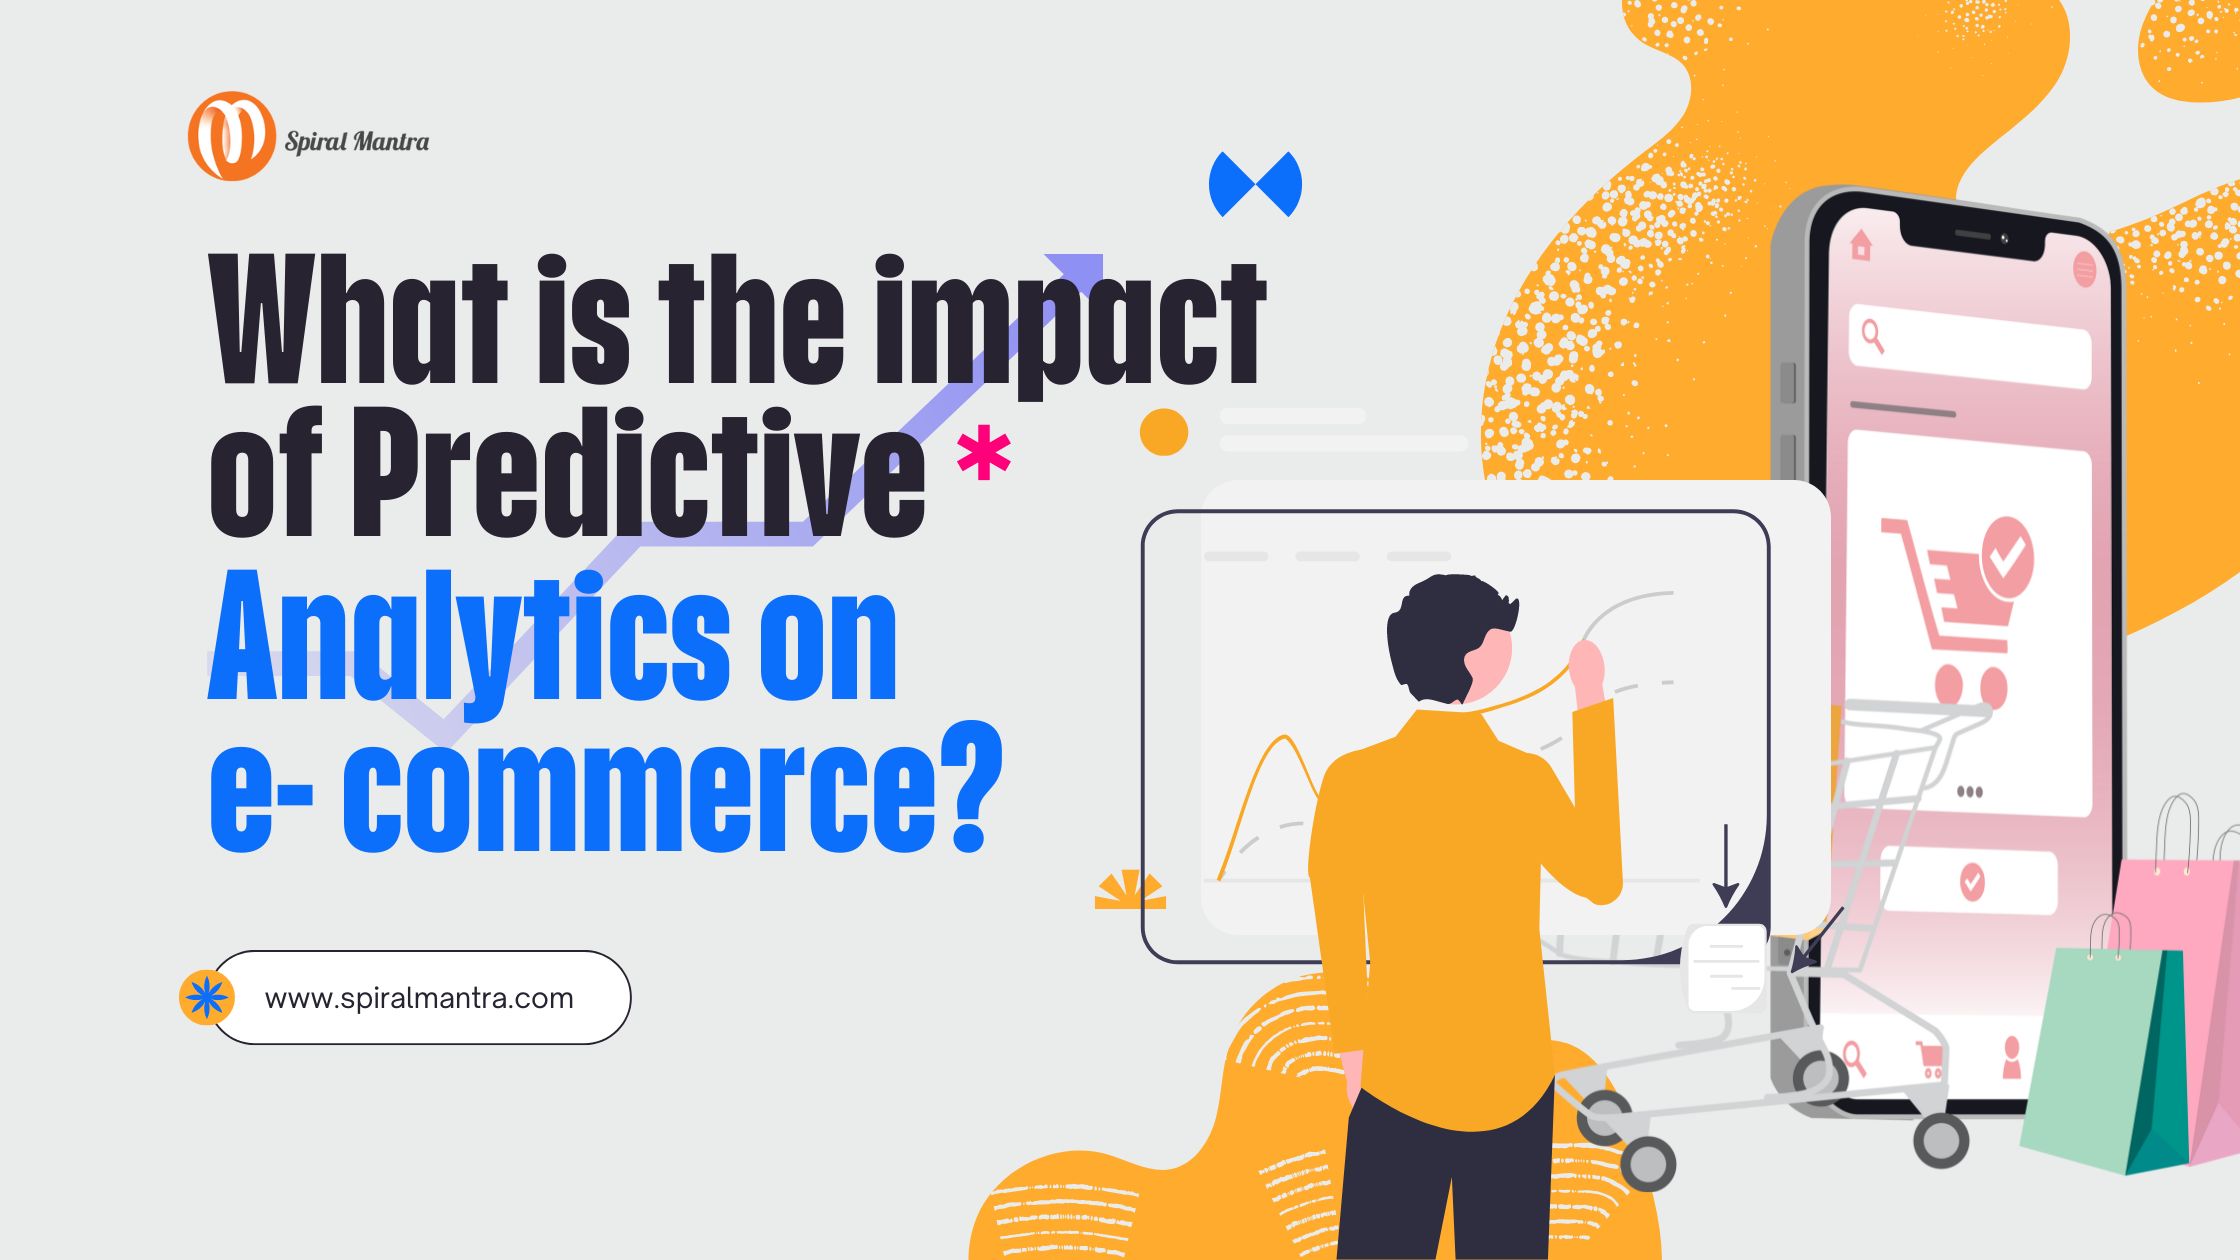 What is the Impact of Predictive Analytics on e-commerce?